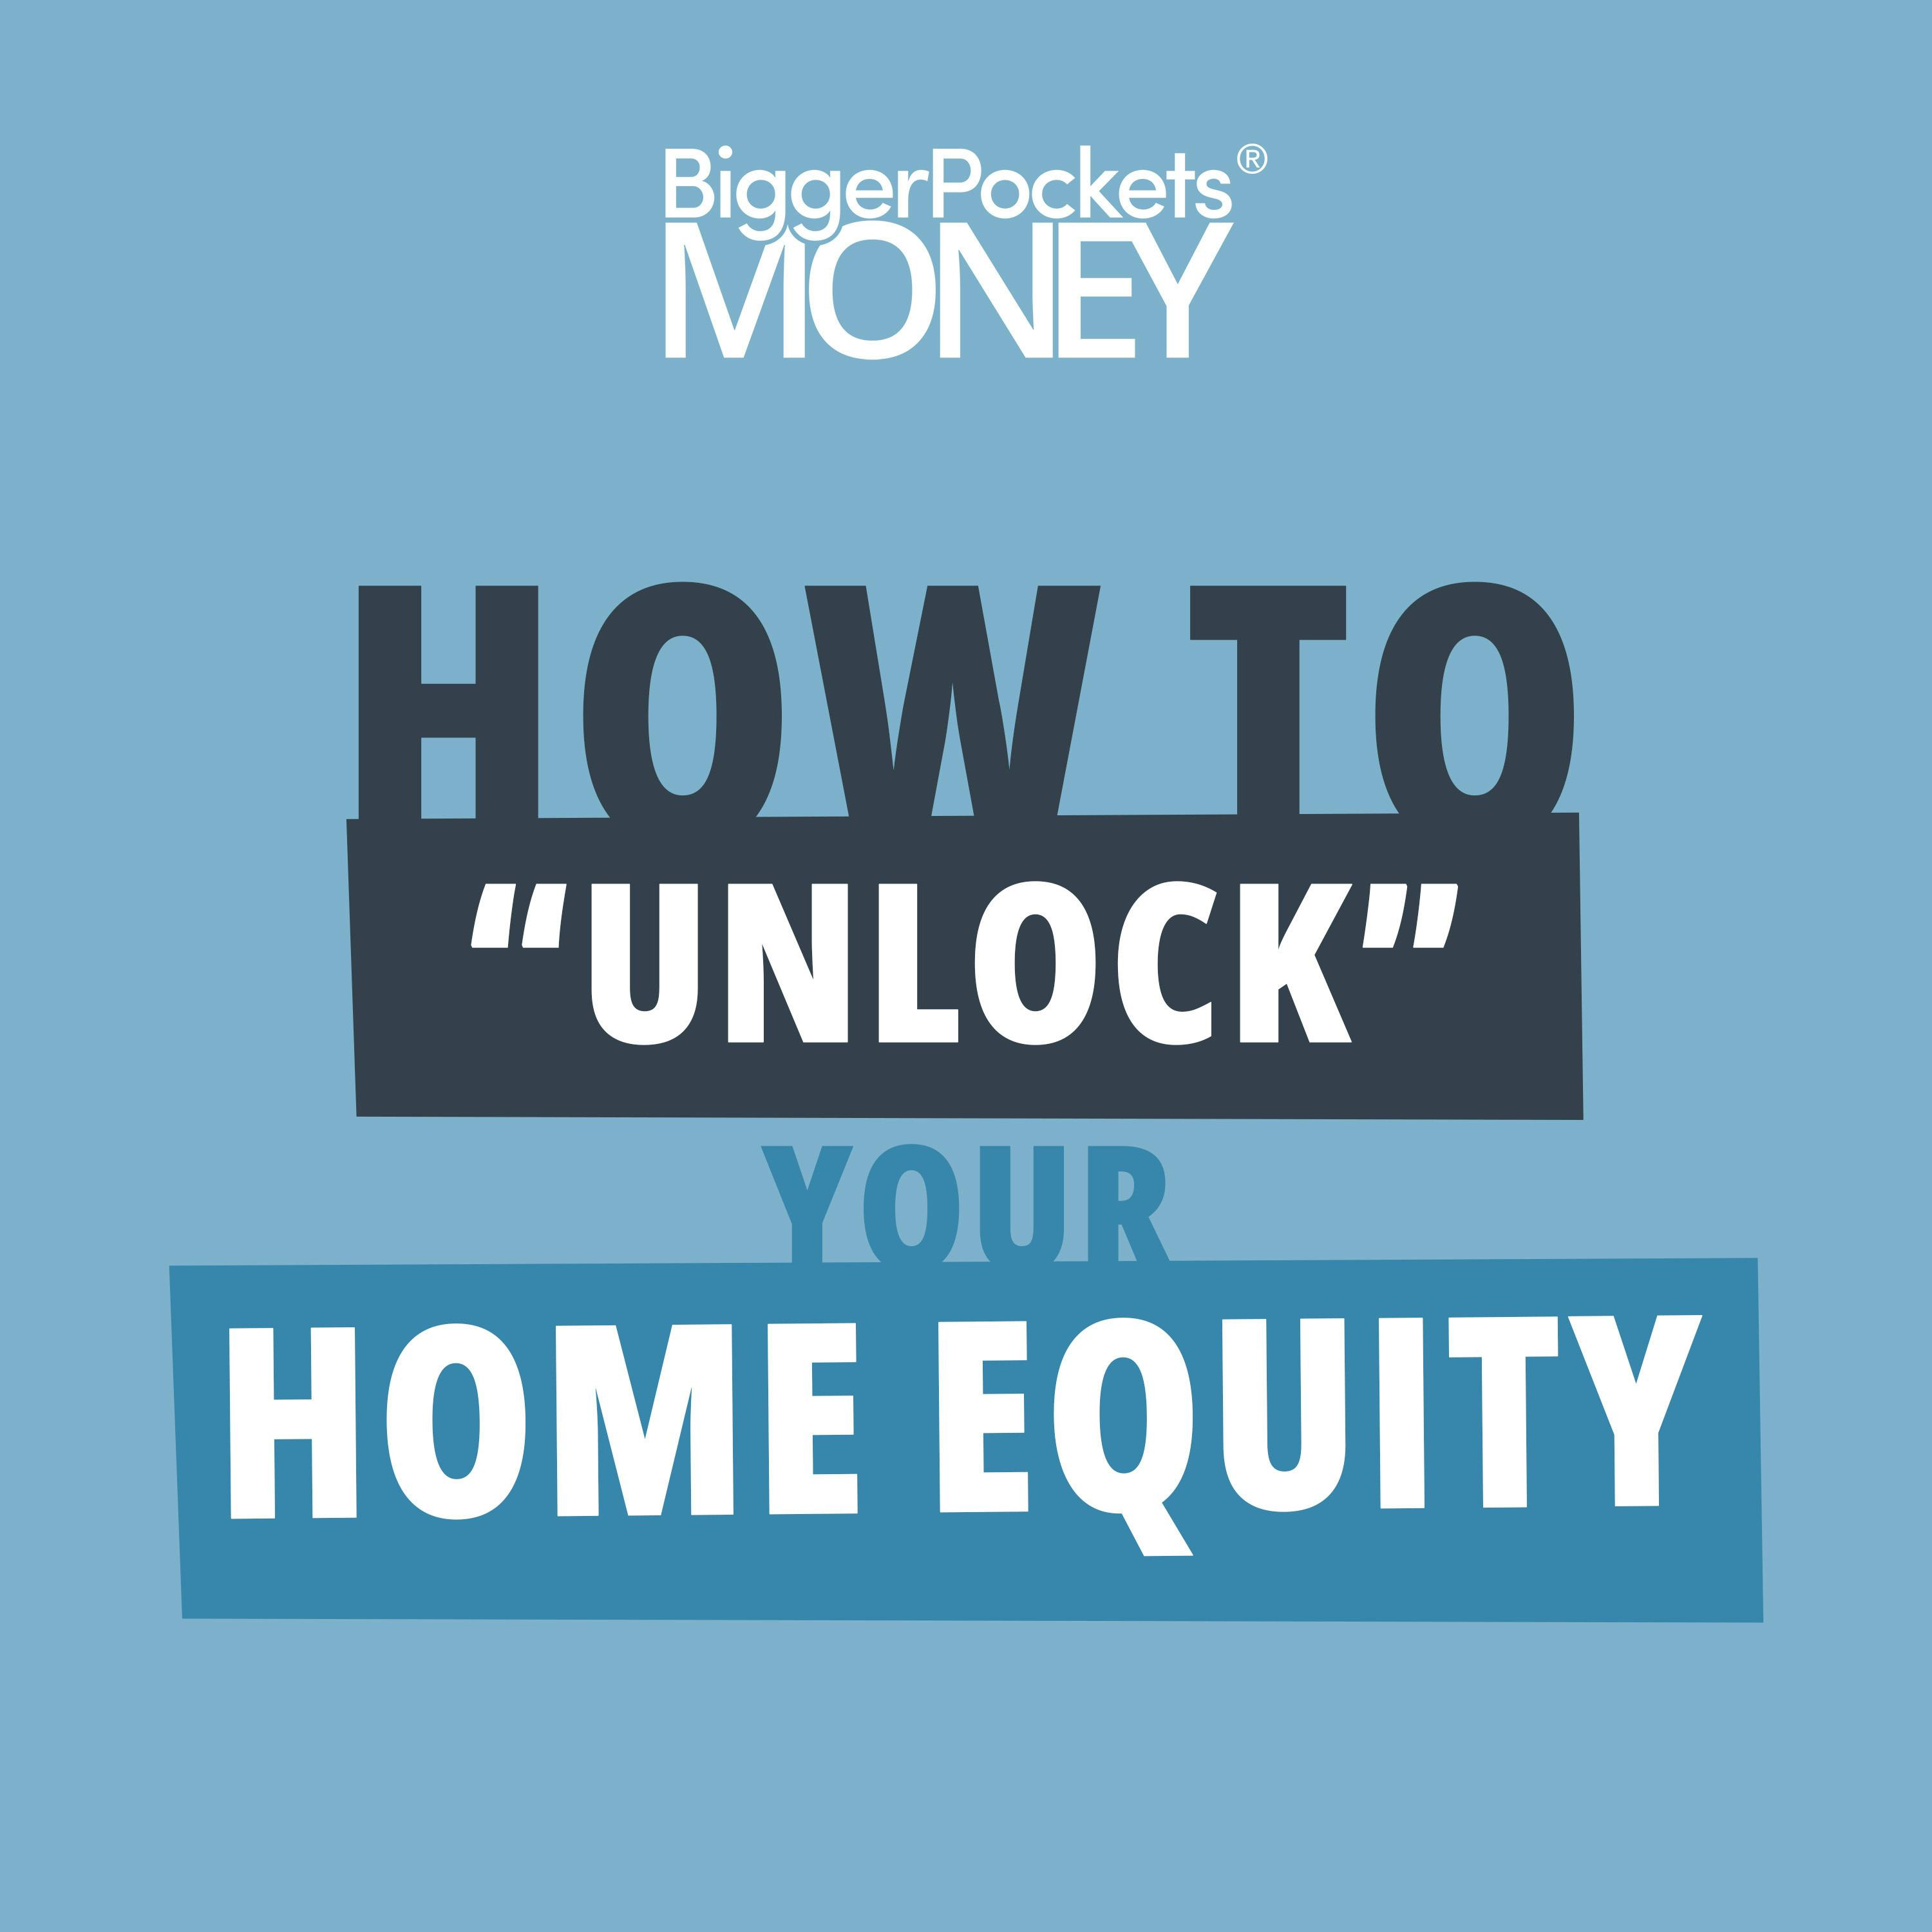 385: How to Use Equity in Your Home to Reach Financial Freedom Faster